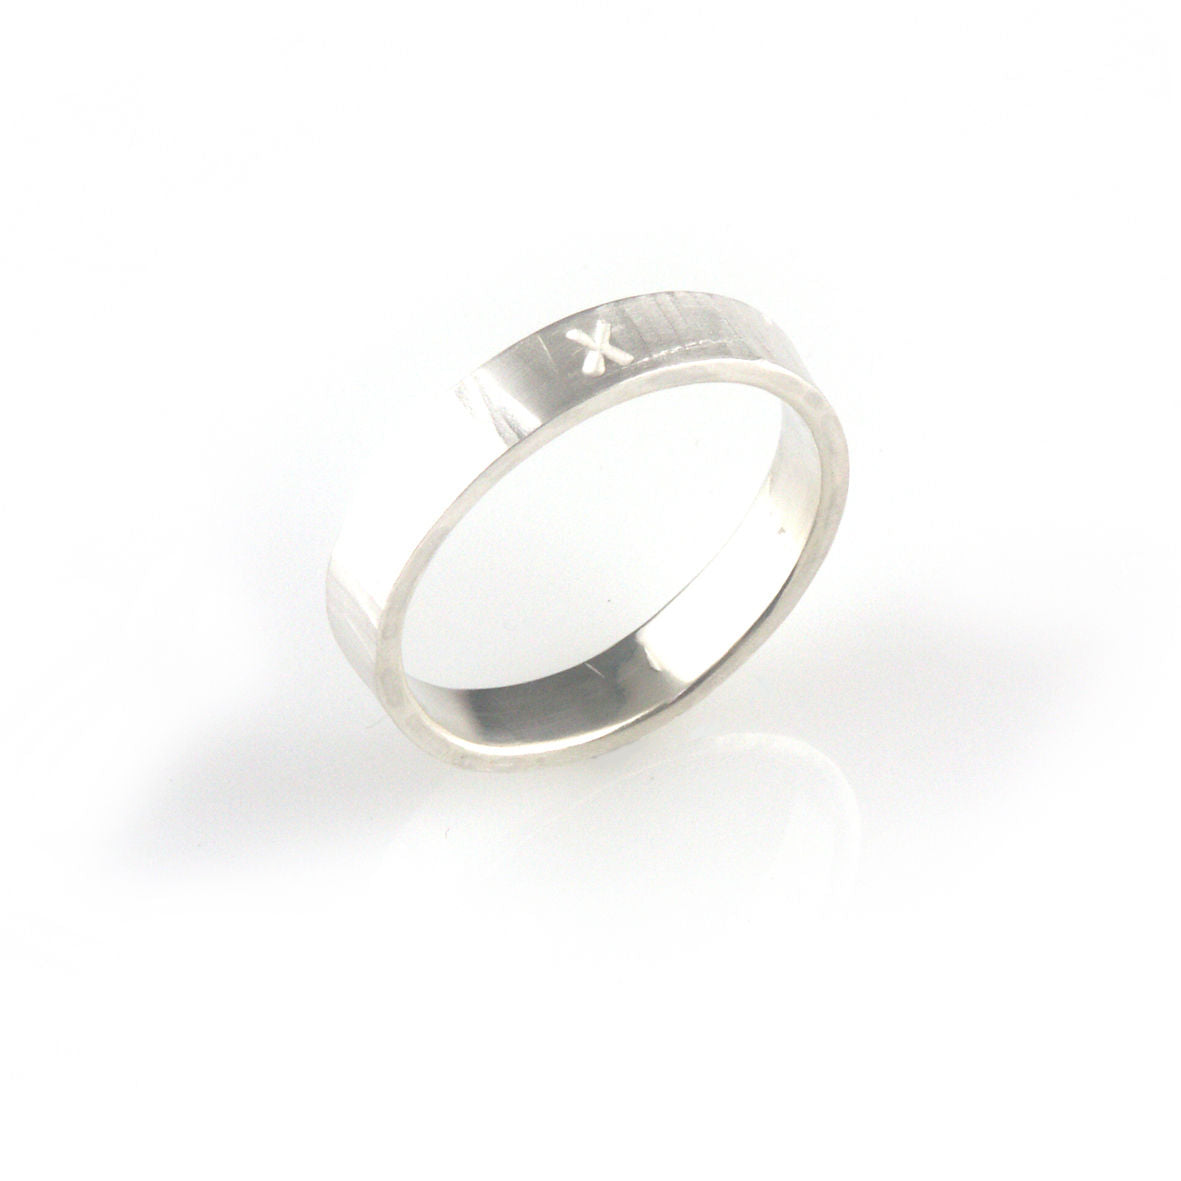 'X collection' - silver ring with word 'X'